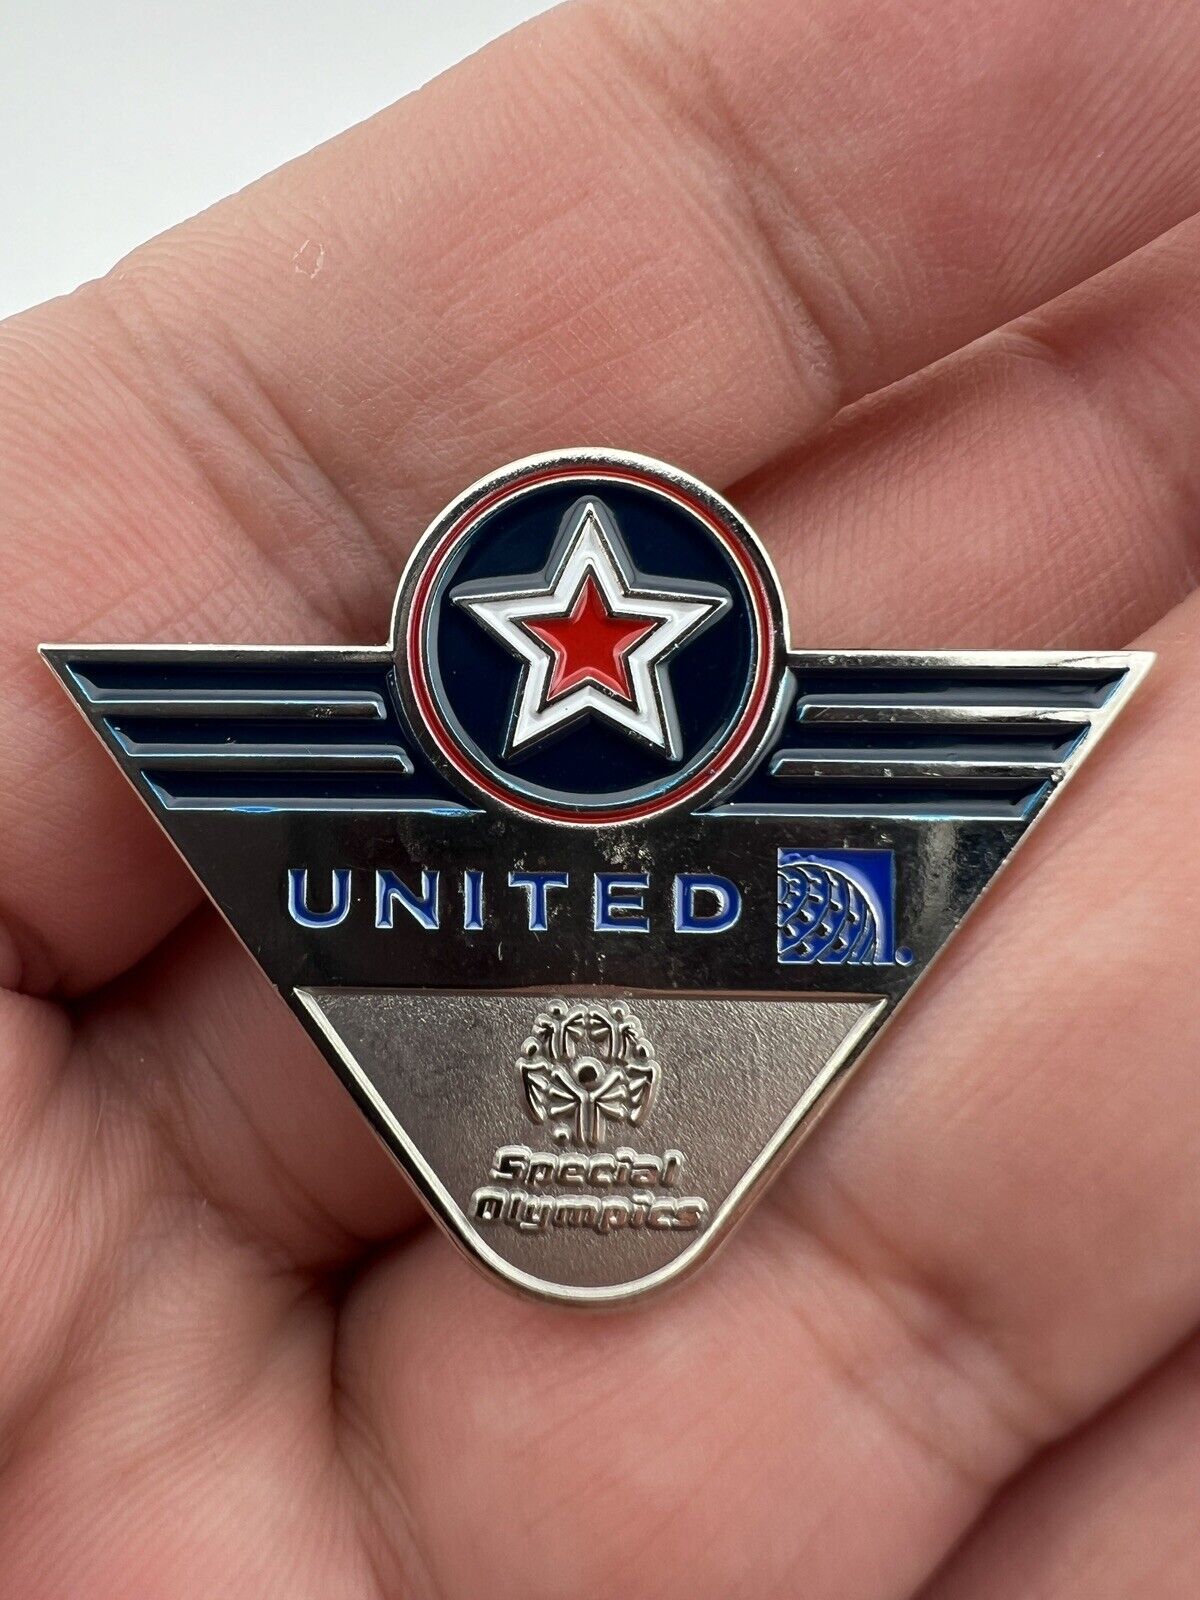 Special OLYMPICs United Airlines Collectable Lapel Hat Pin